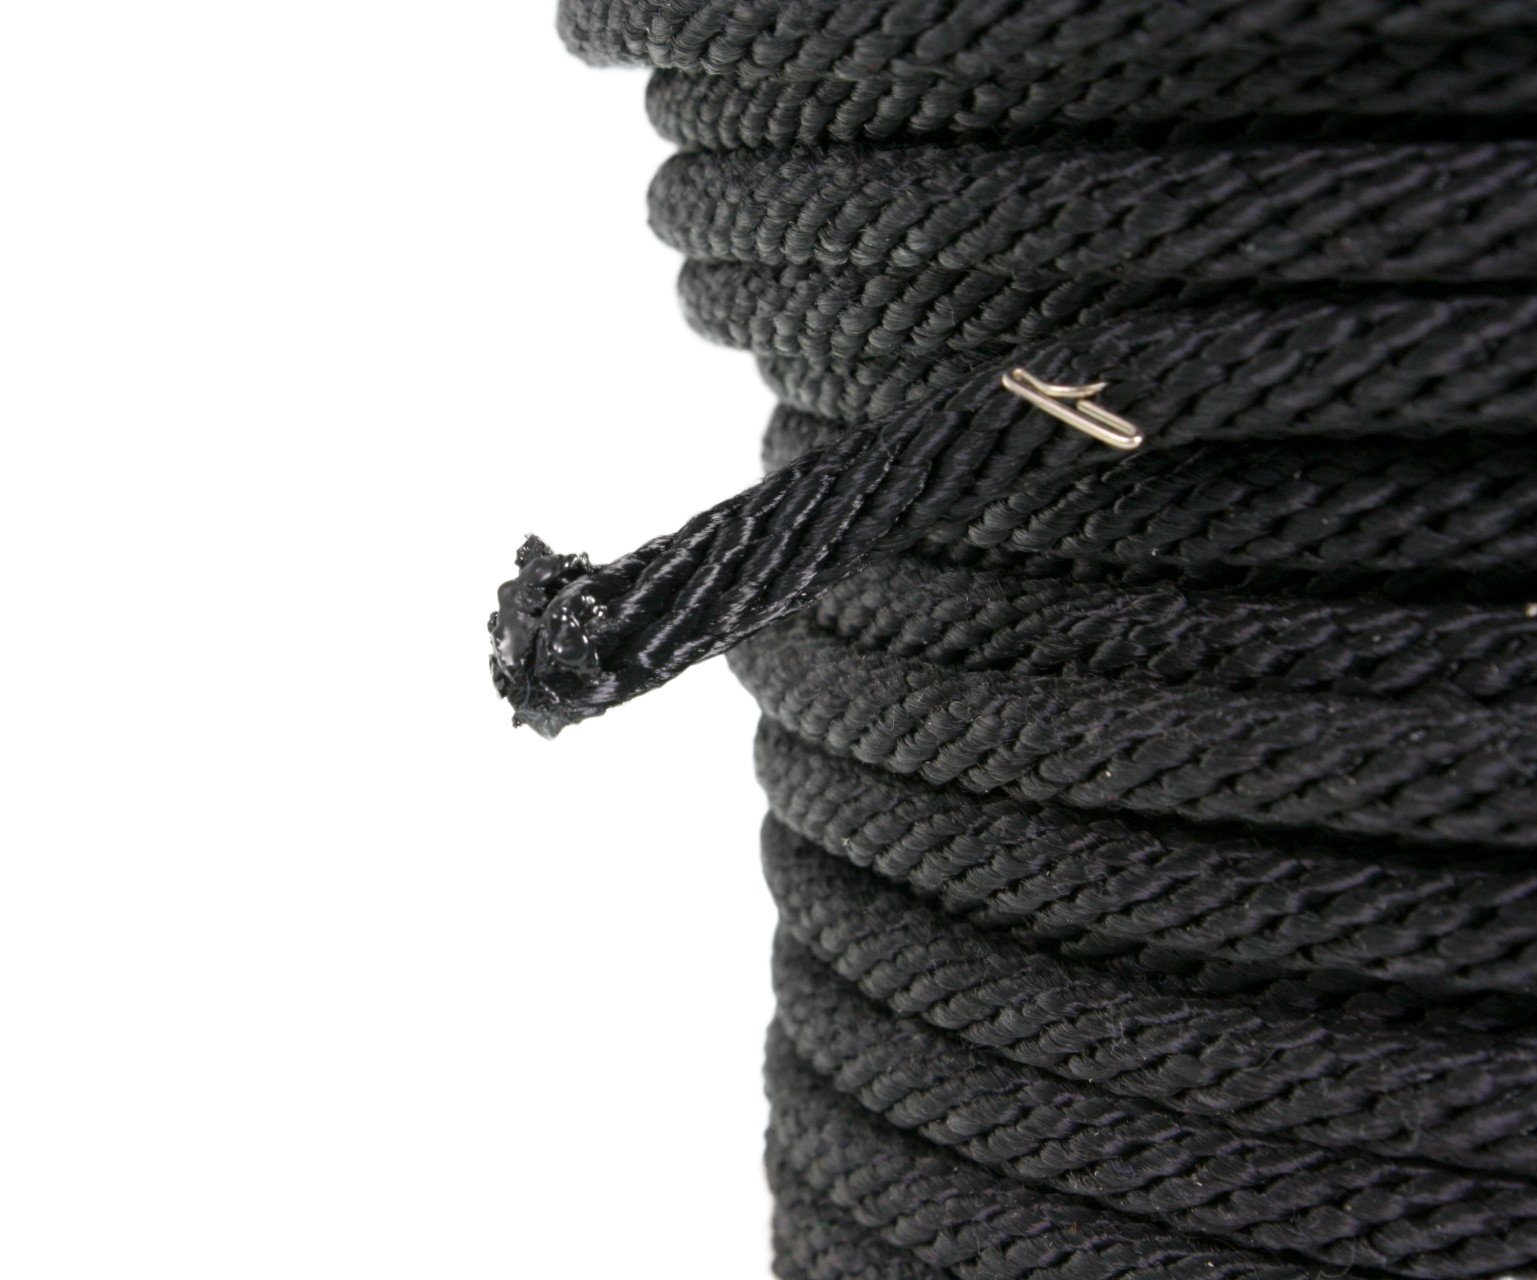 End of a roll of black sash cord, showing that the tail of it has been burned to seal the fibres.